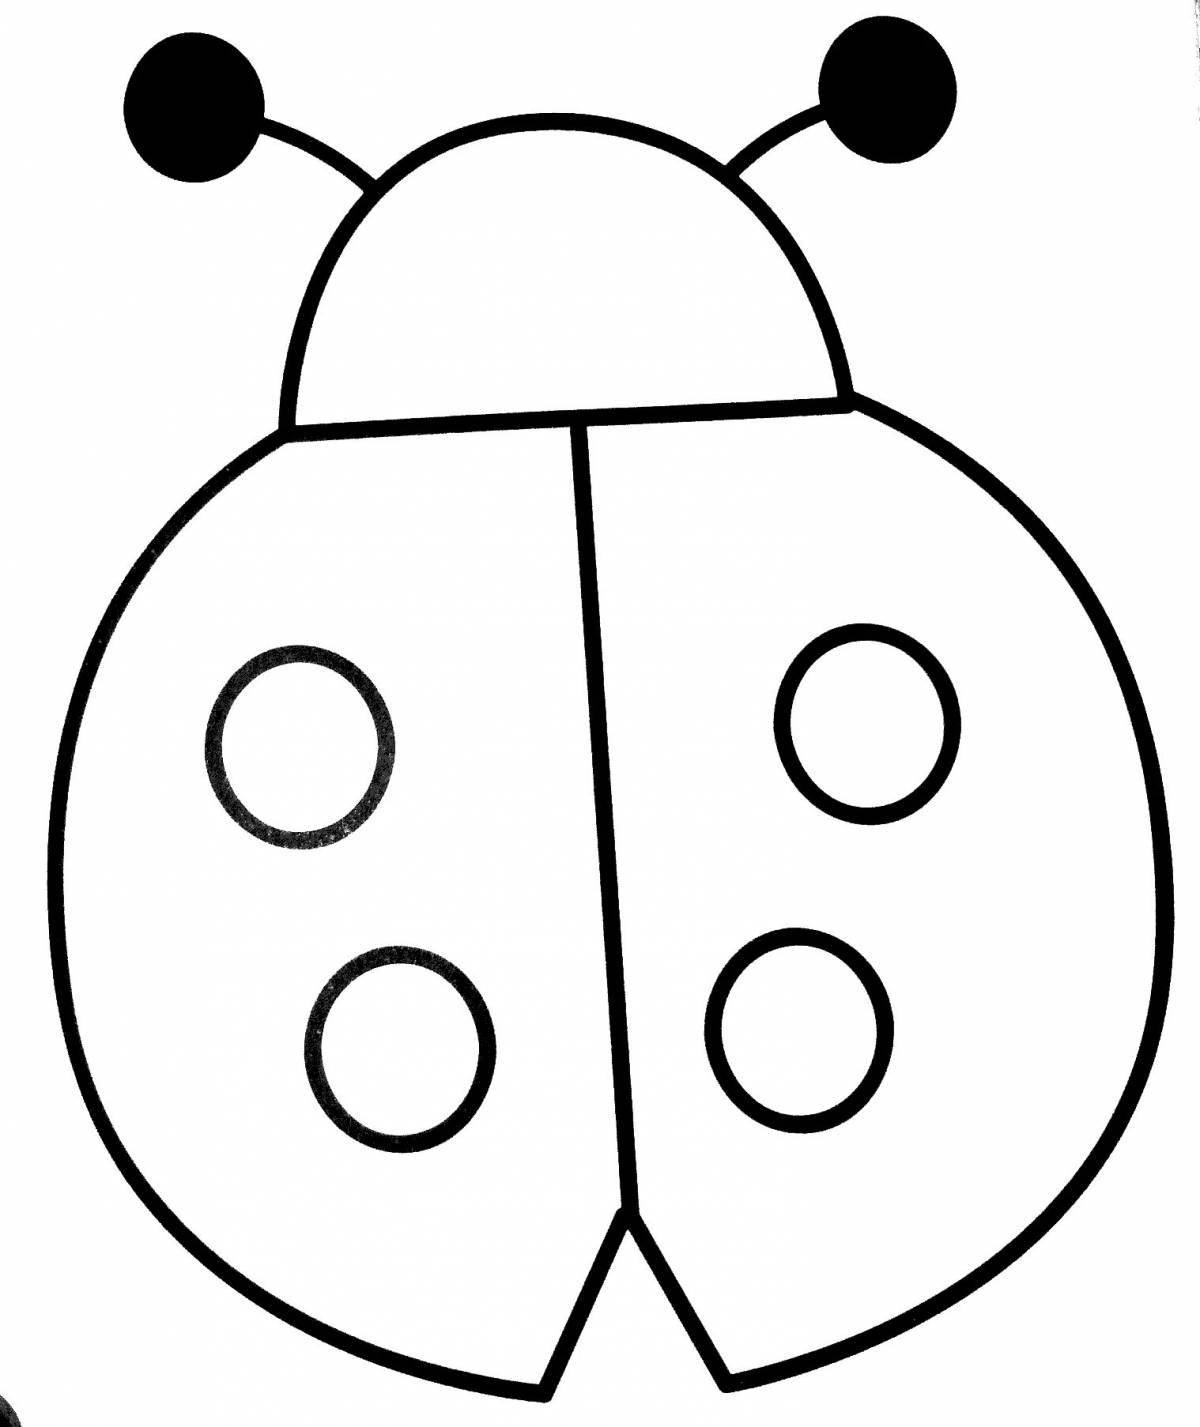 Merry ladybug coloring for kids